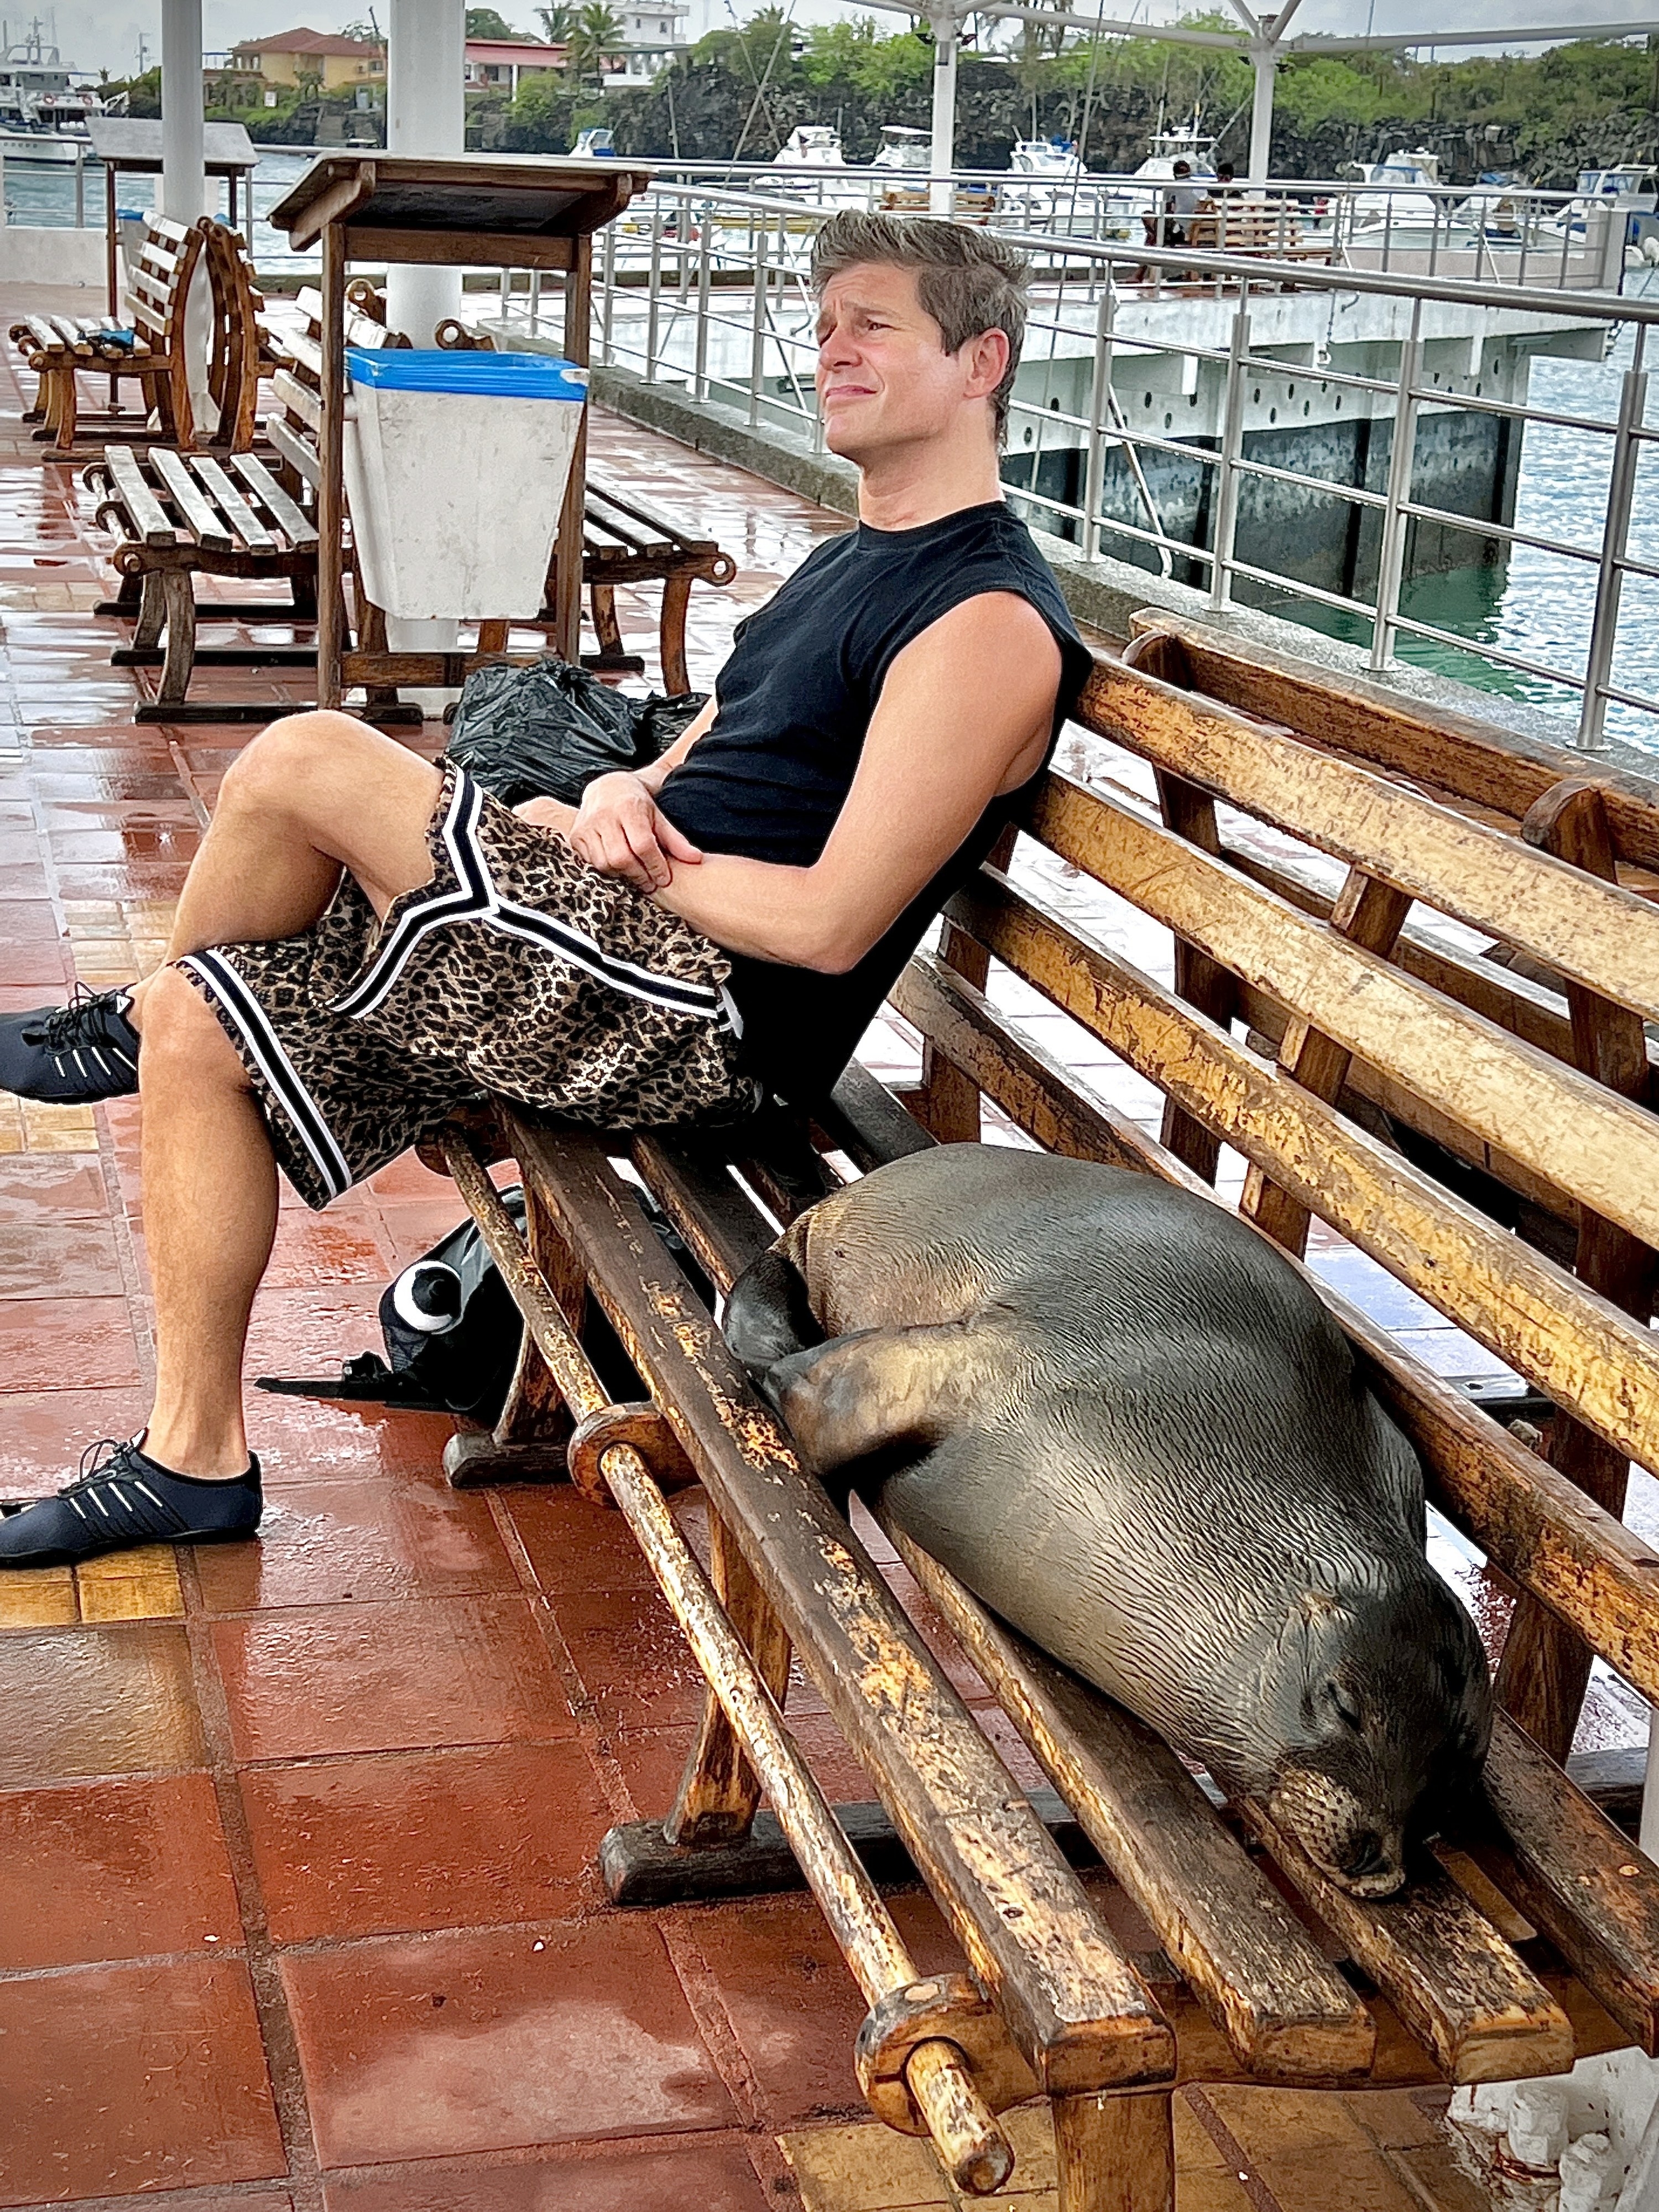 A man and sea lion together on a bench by the water